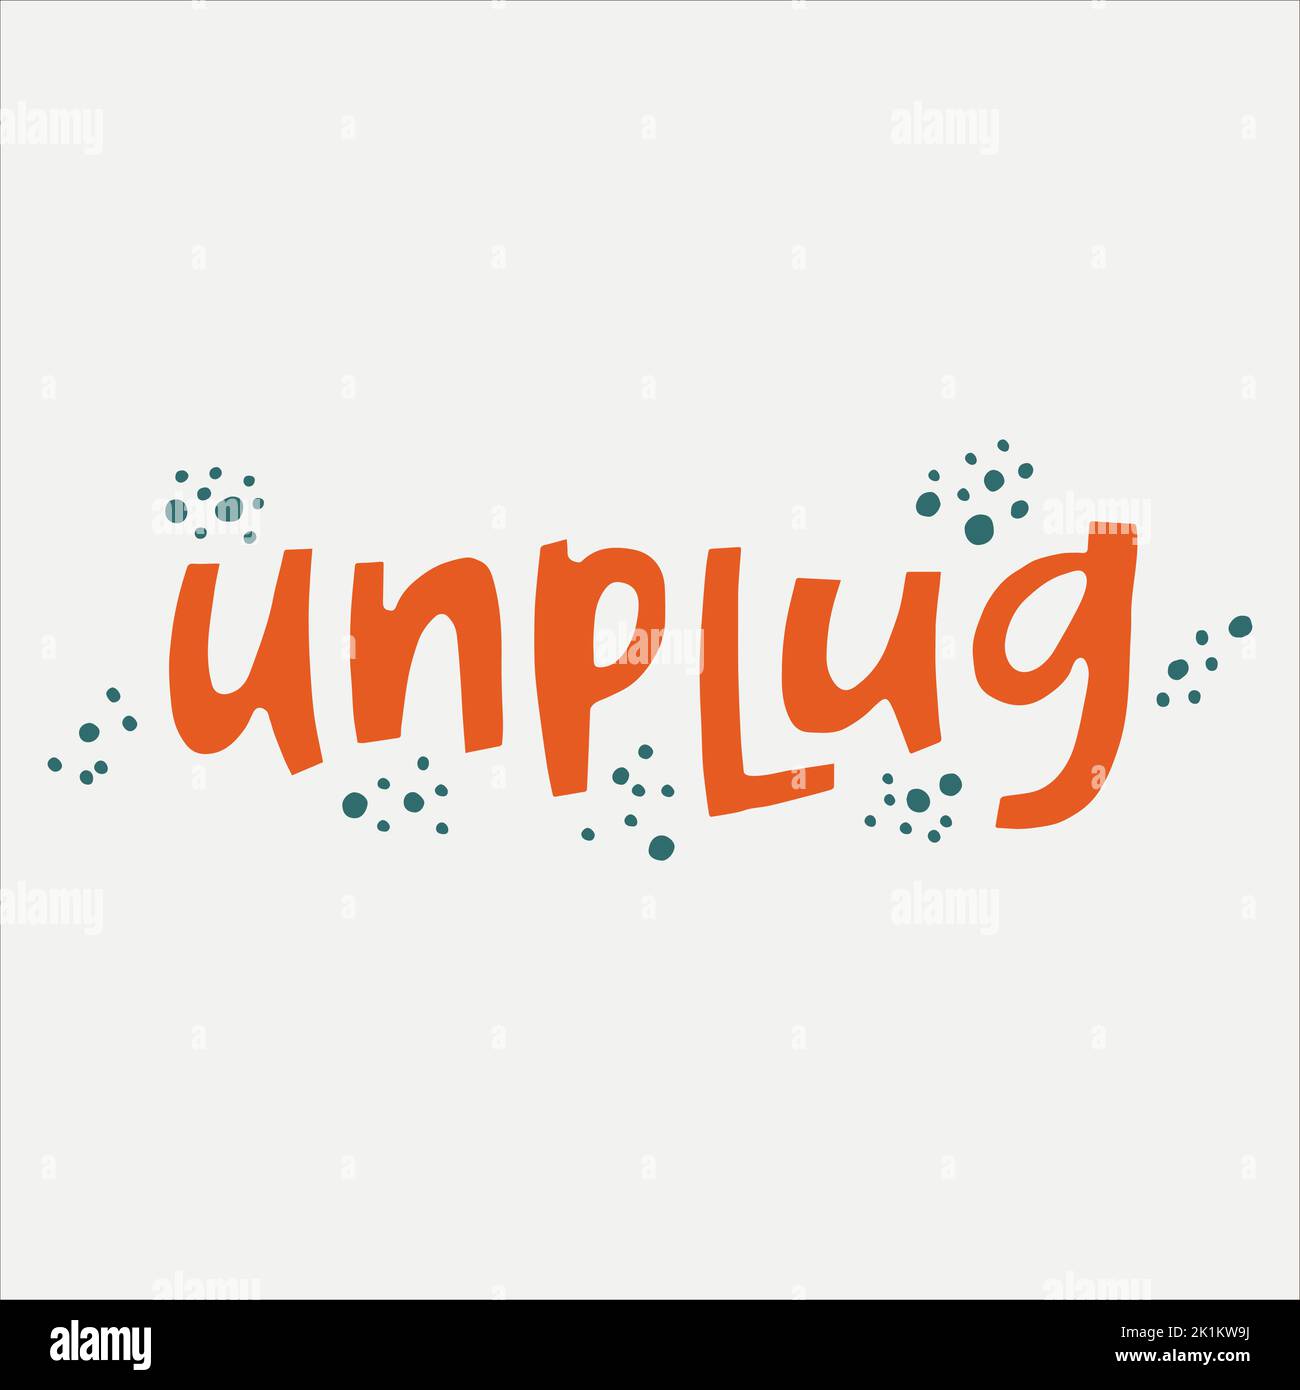 Unplug - hand-drawn word. Creative lettering illustration for posters, cards, etc. Stock Vector